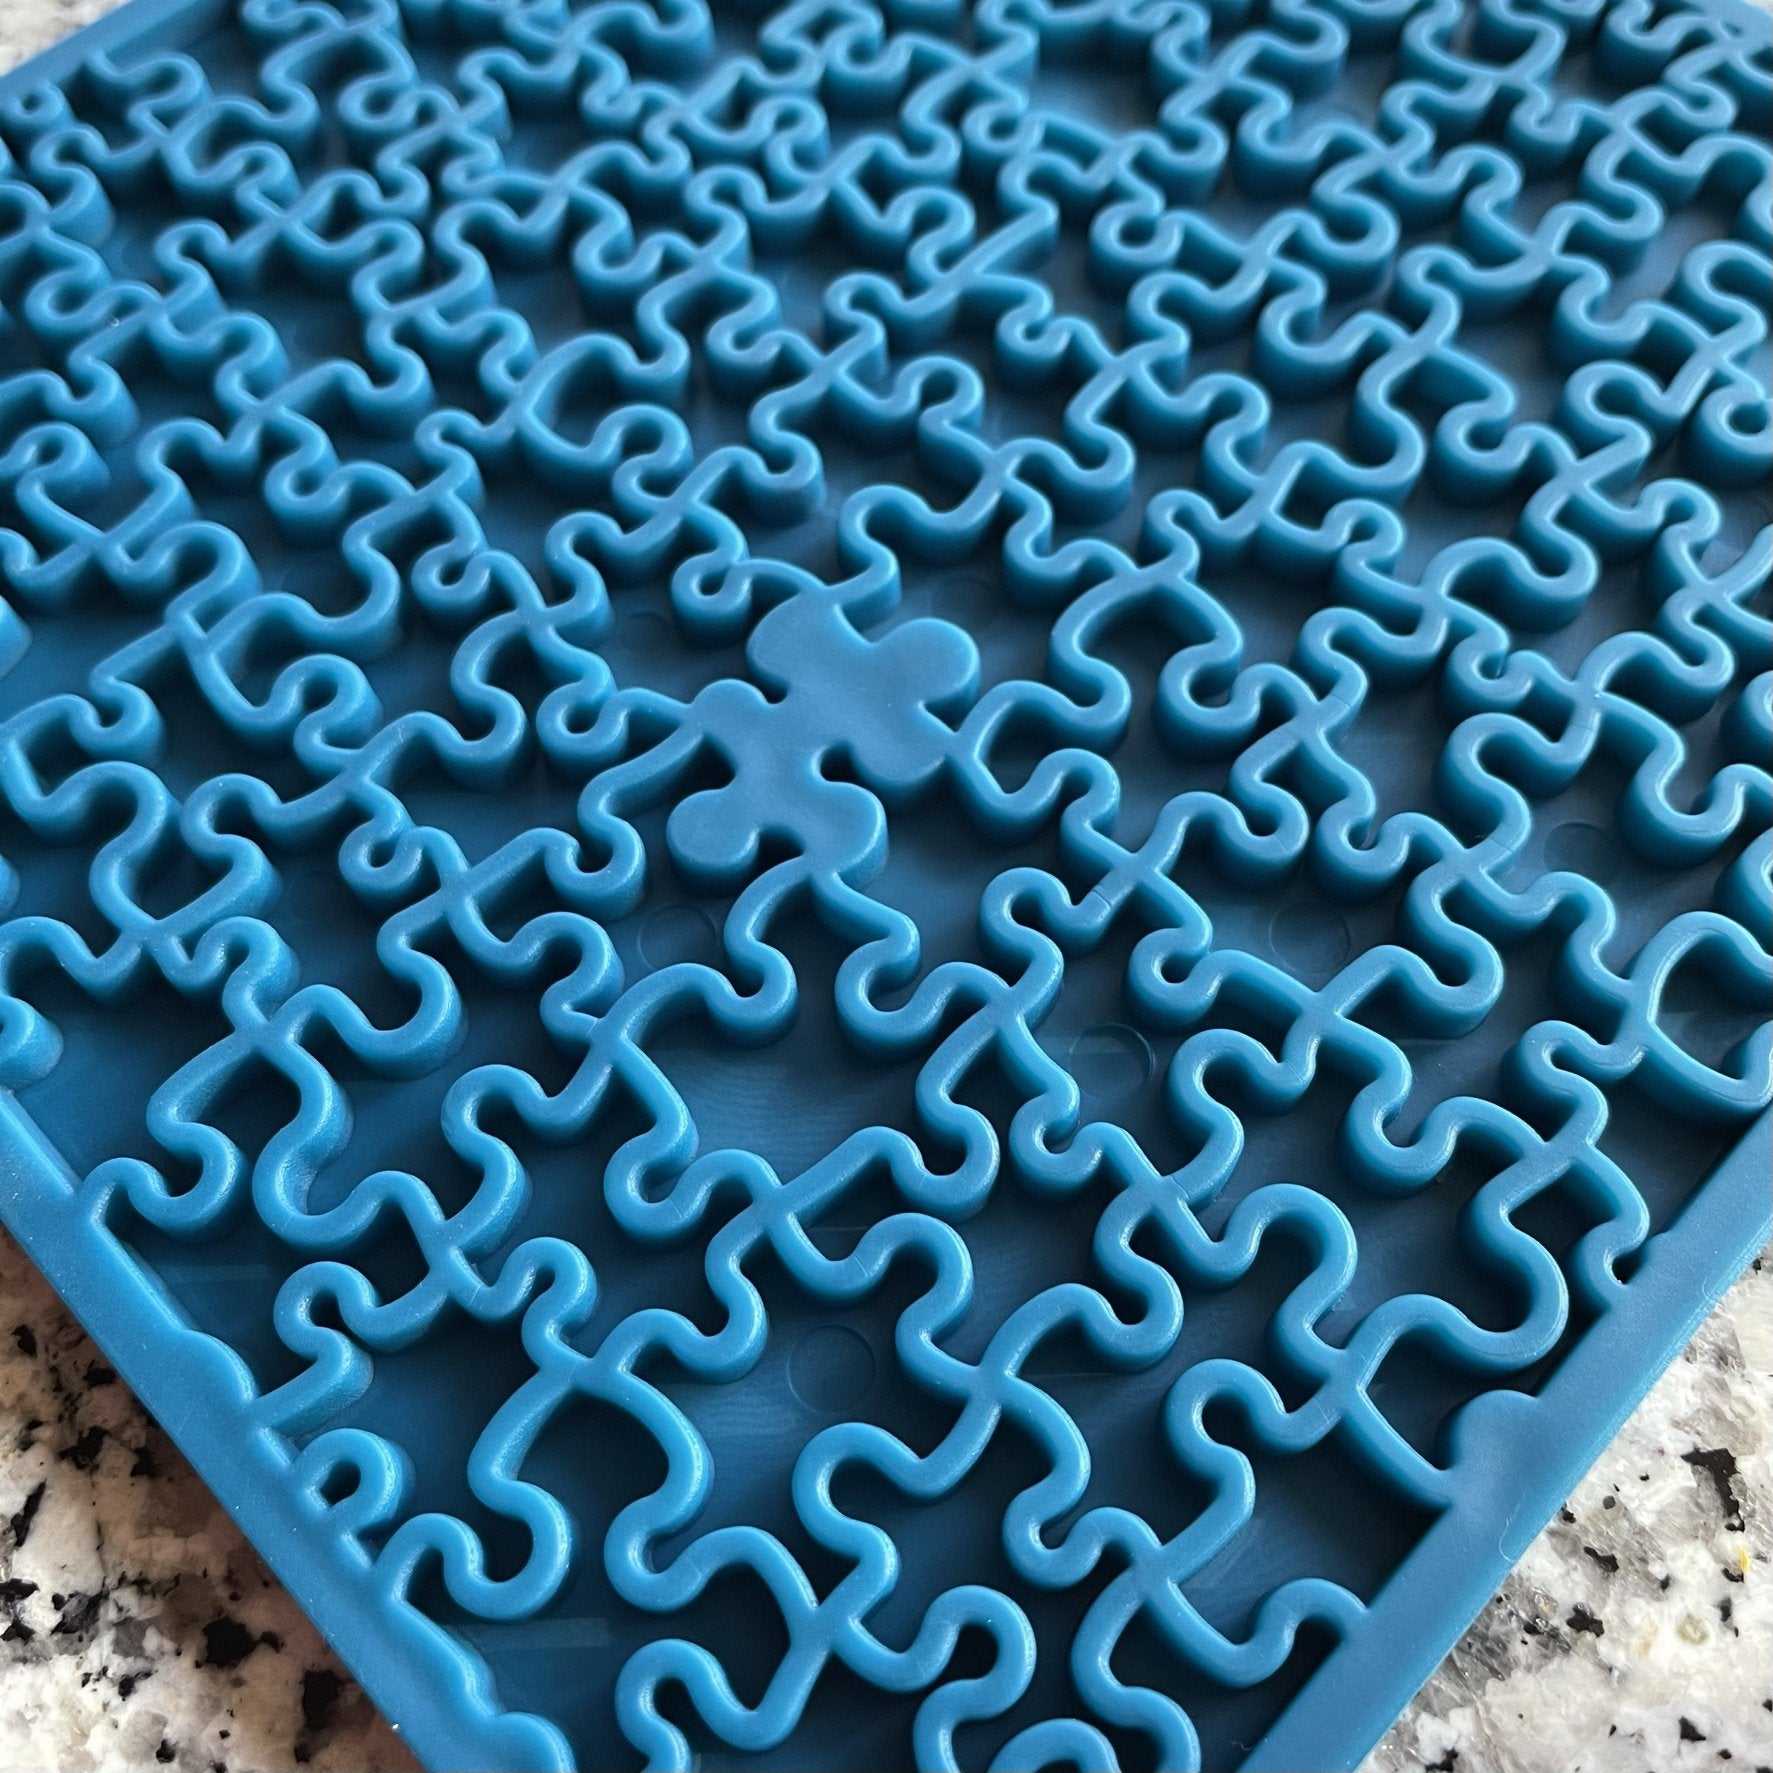 Blue Soda Pup silicone trivet with interlocking puzzle piece design, ideal as Soda Pup EMAT ENRICHMENT LICKING MATs from Your Whole Dog.